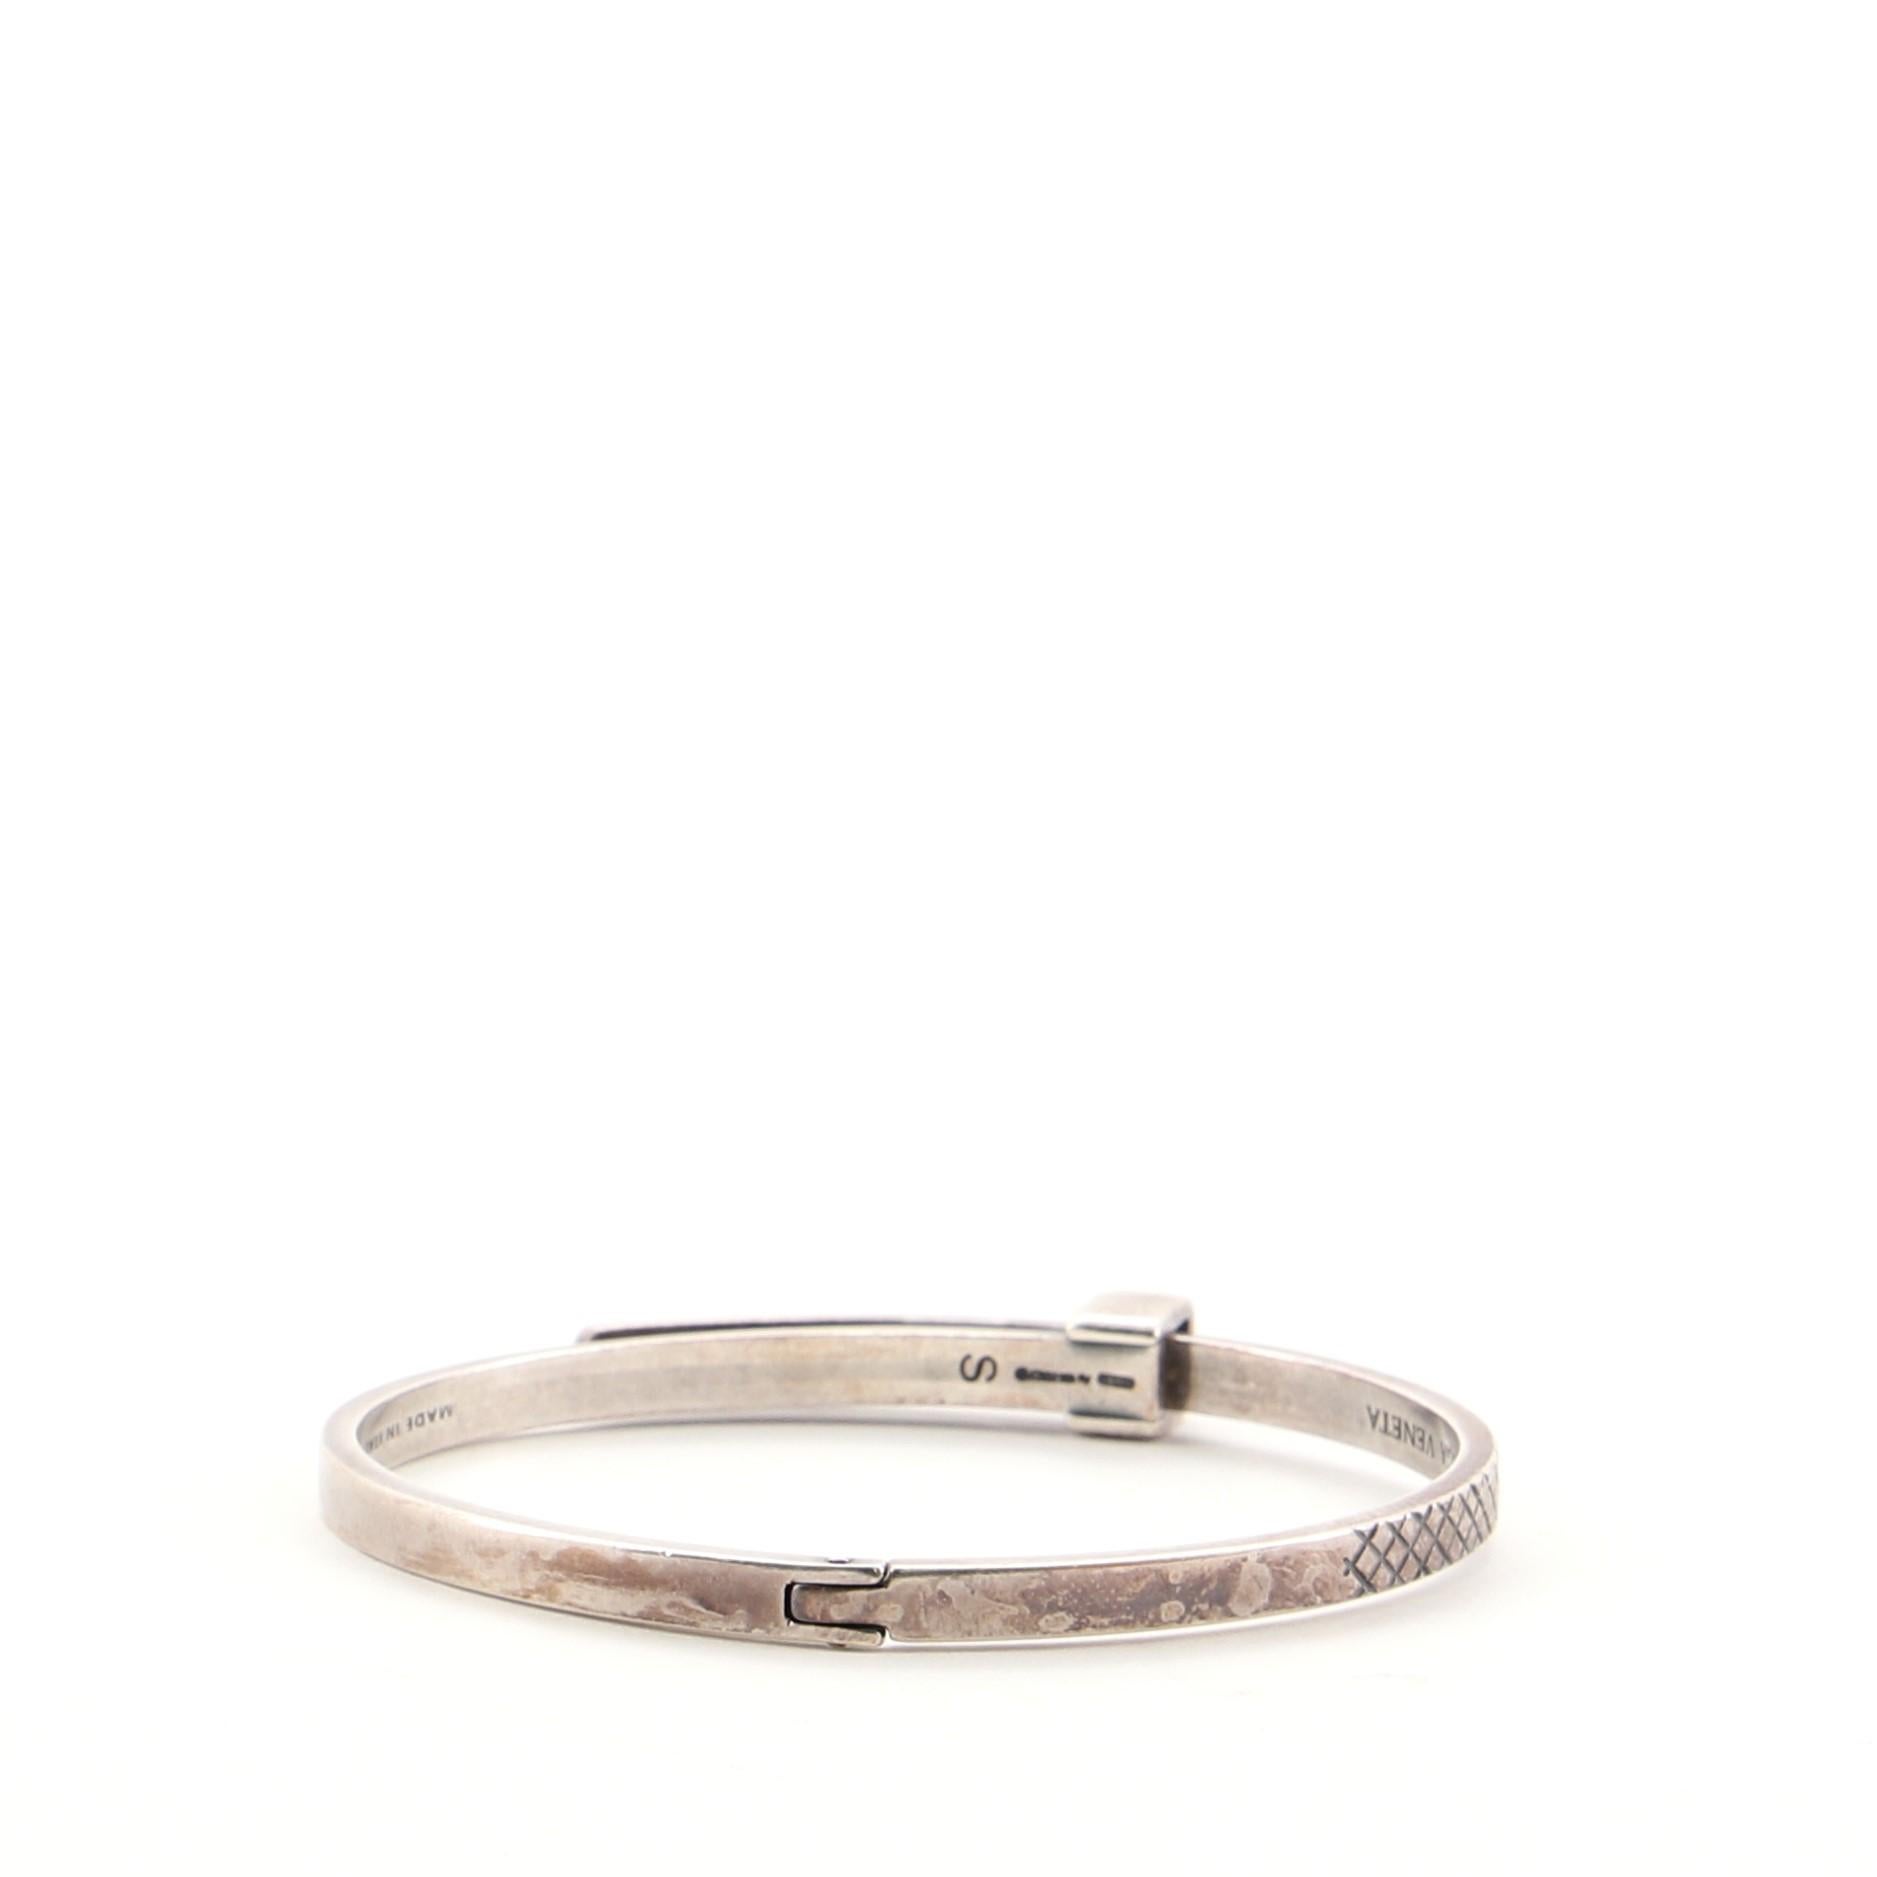 Bottega Veneta Intrecciato Bangle Sterling Silver
Silver

Condition Details: Moderate wear, scratches, dings and tarnish throughout.

49973MSC

Height 